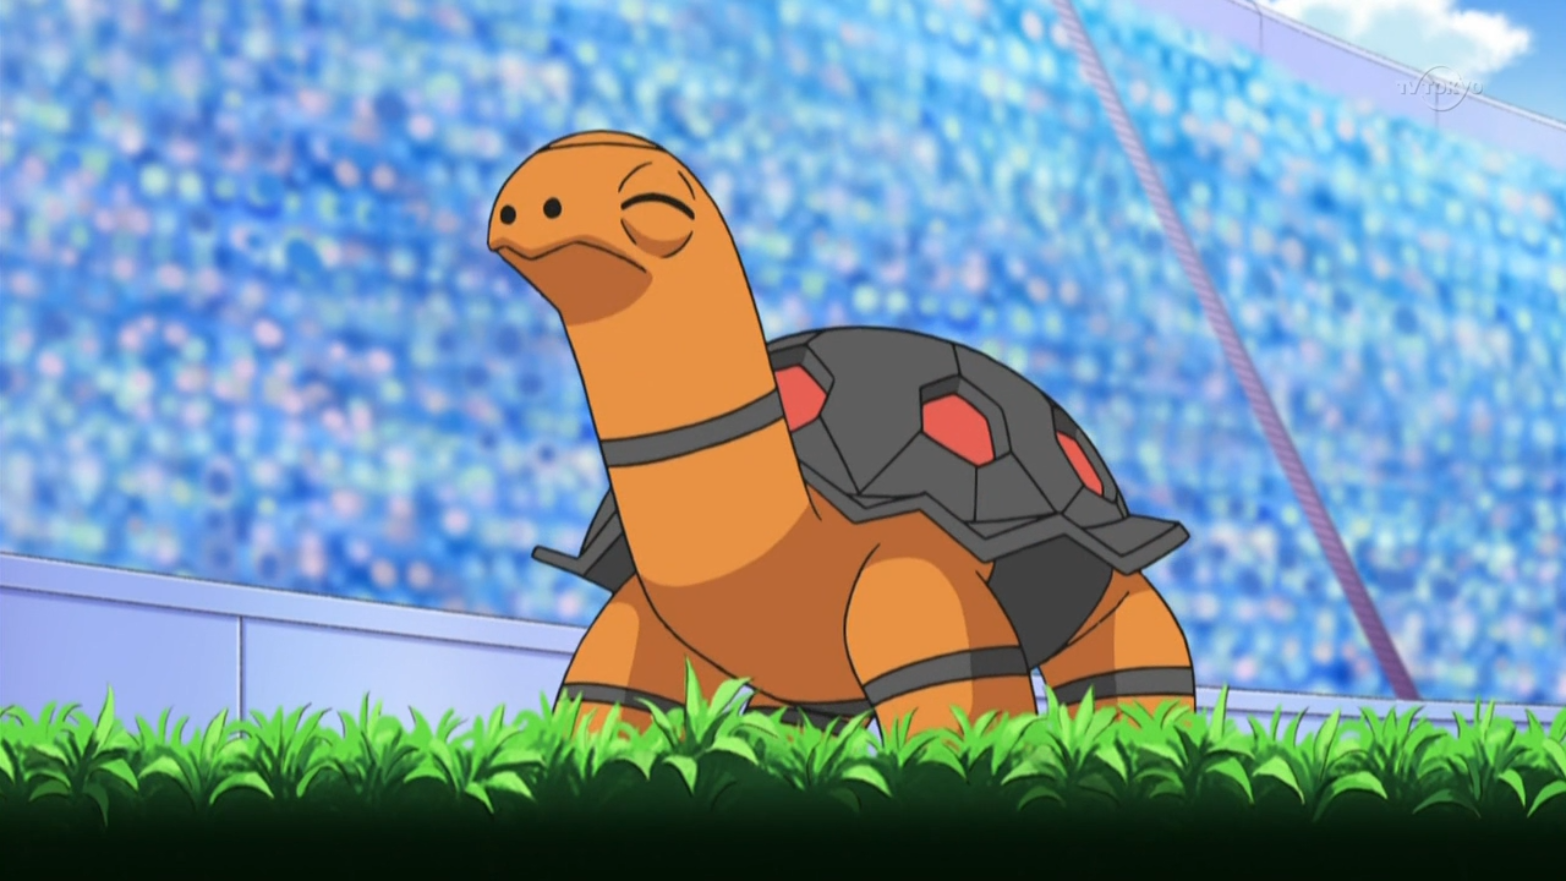 Torkoal stands on grass in the middle of a stadium in Pokémon.